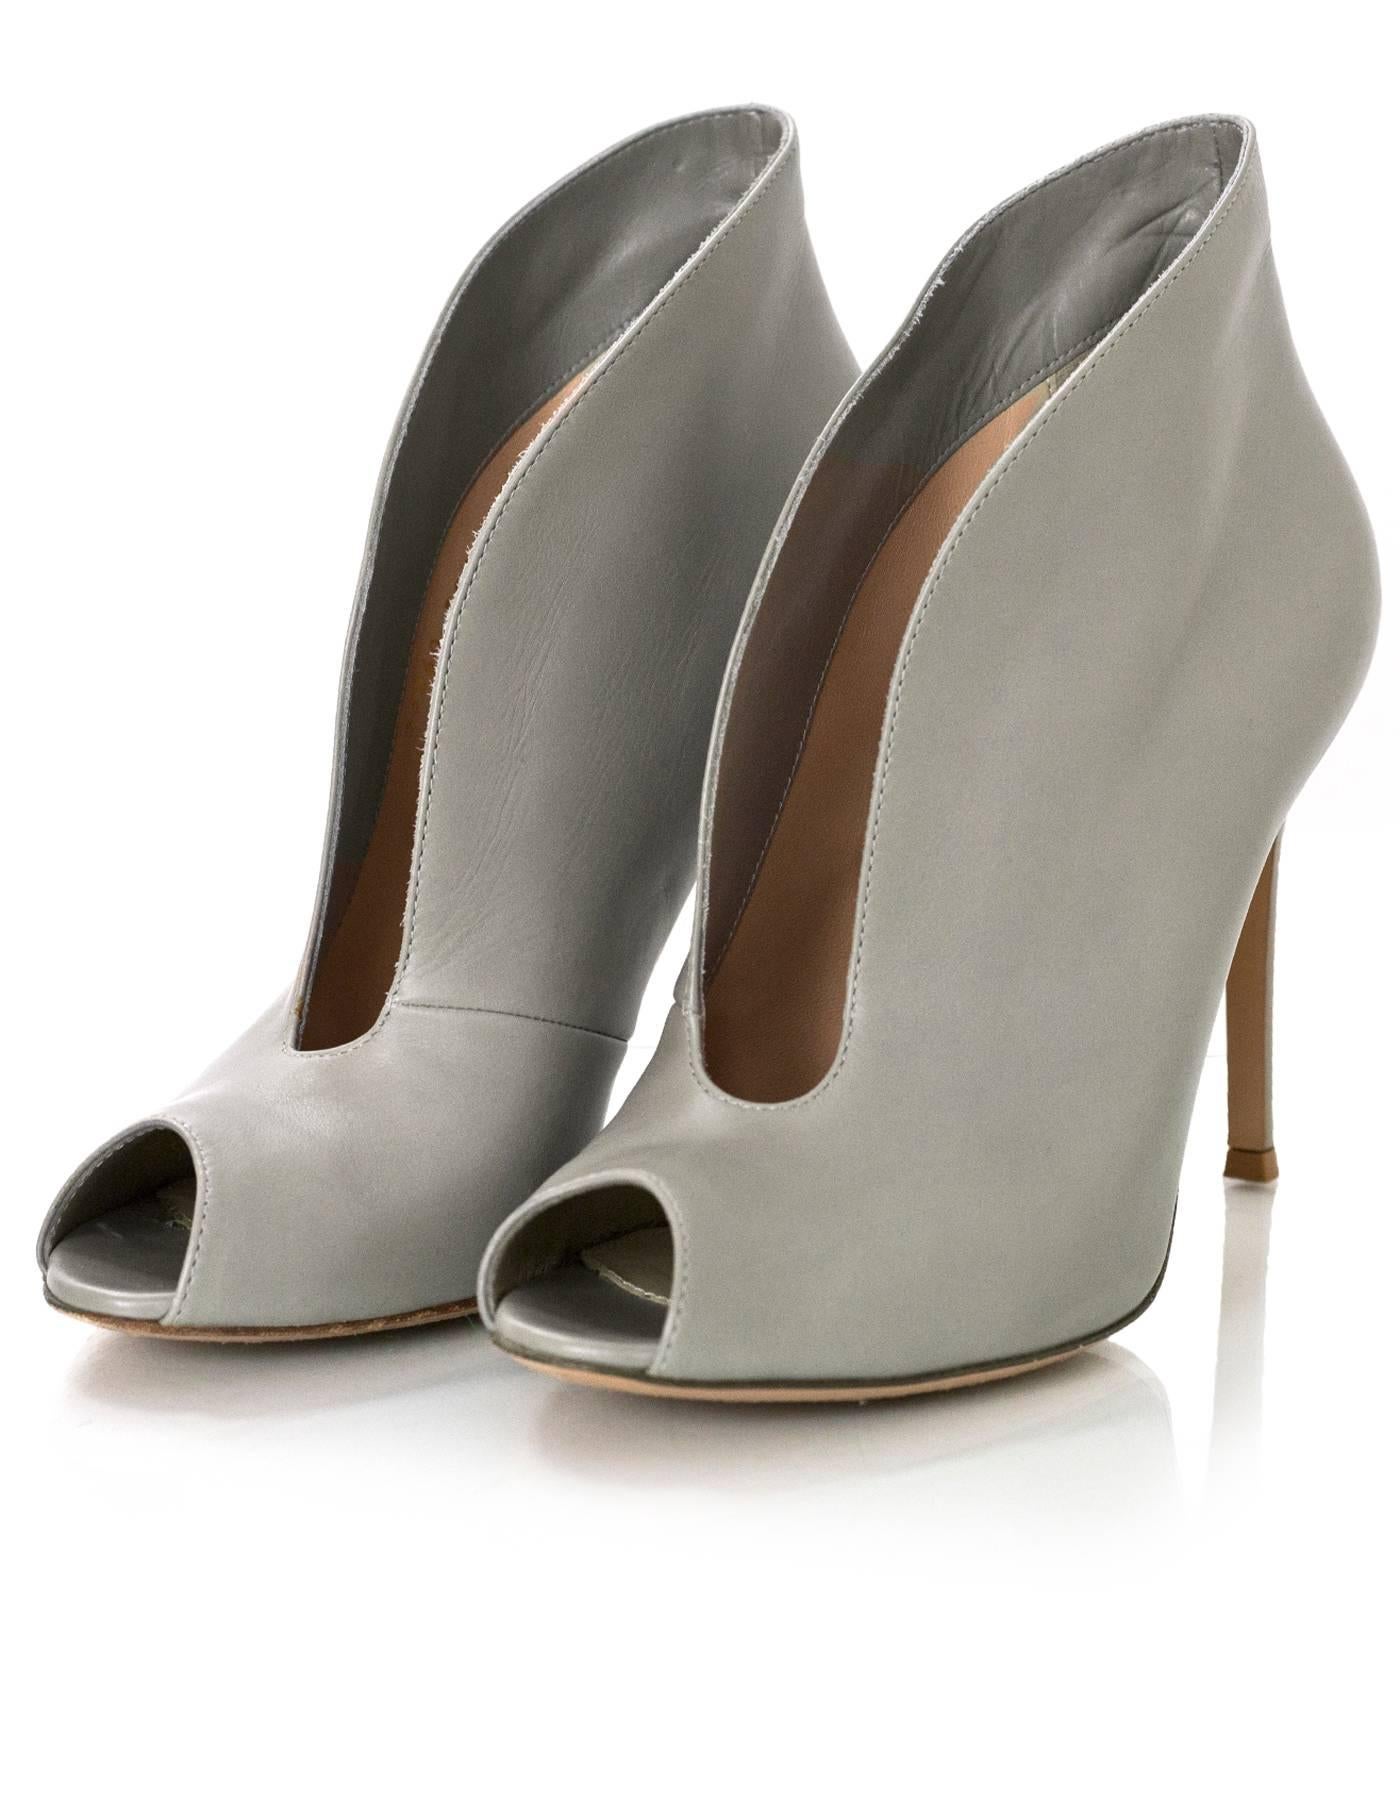 Gianvito Rossi Grey Vamp V-Neck Peep-Toe Booties Sz 36.5

Made In: Italy
Color: Grey
Materials: Leather
Closure/Opening: Slide on
Sole Stamp: Made in Italy Gianvito Rossi 36.5
Retail Price: $895 + tax
Overall Condition: Excellent pre-owned condition